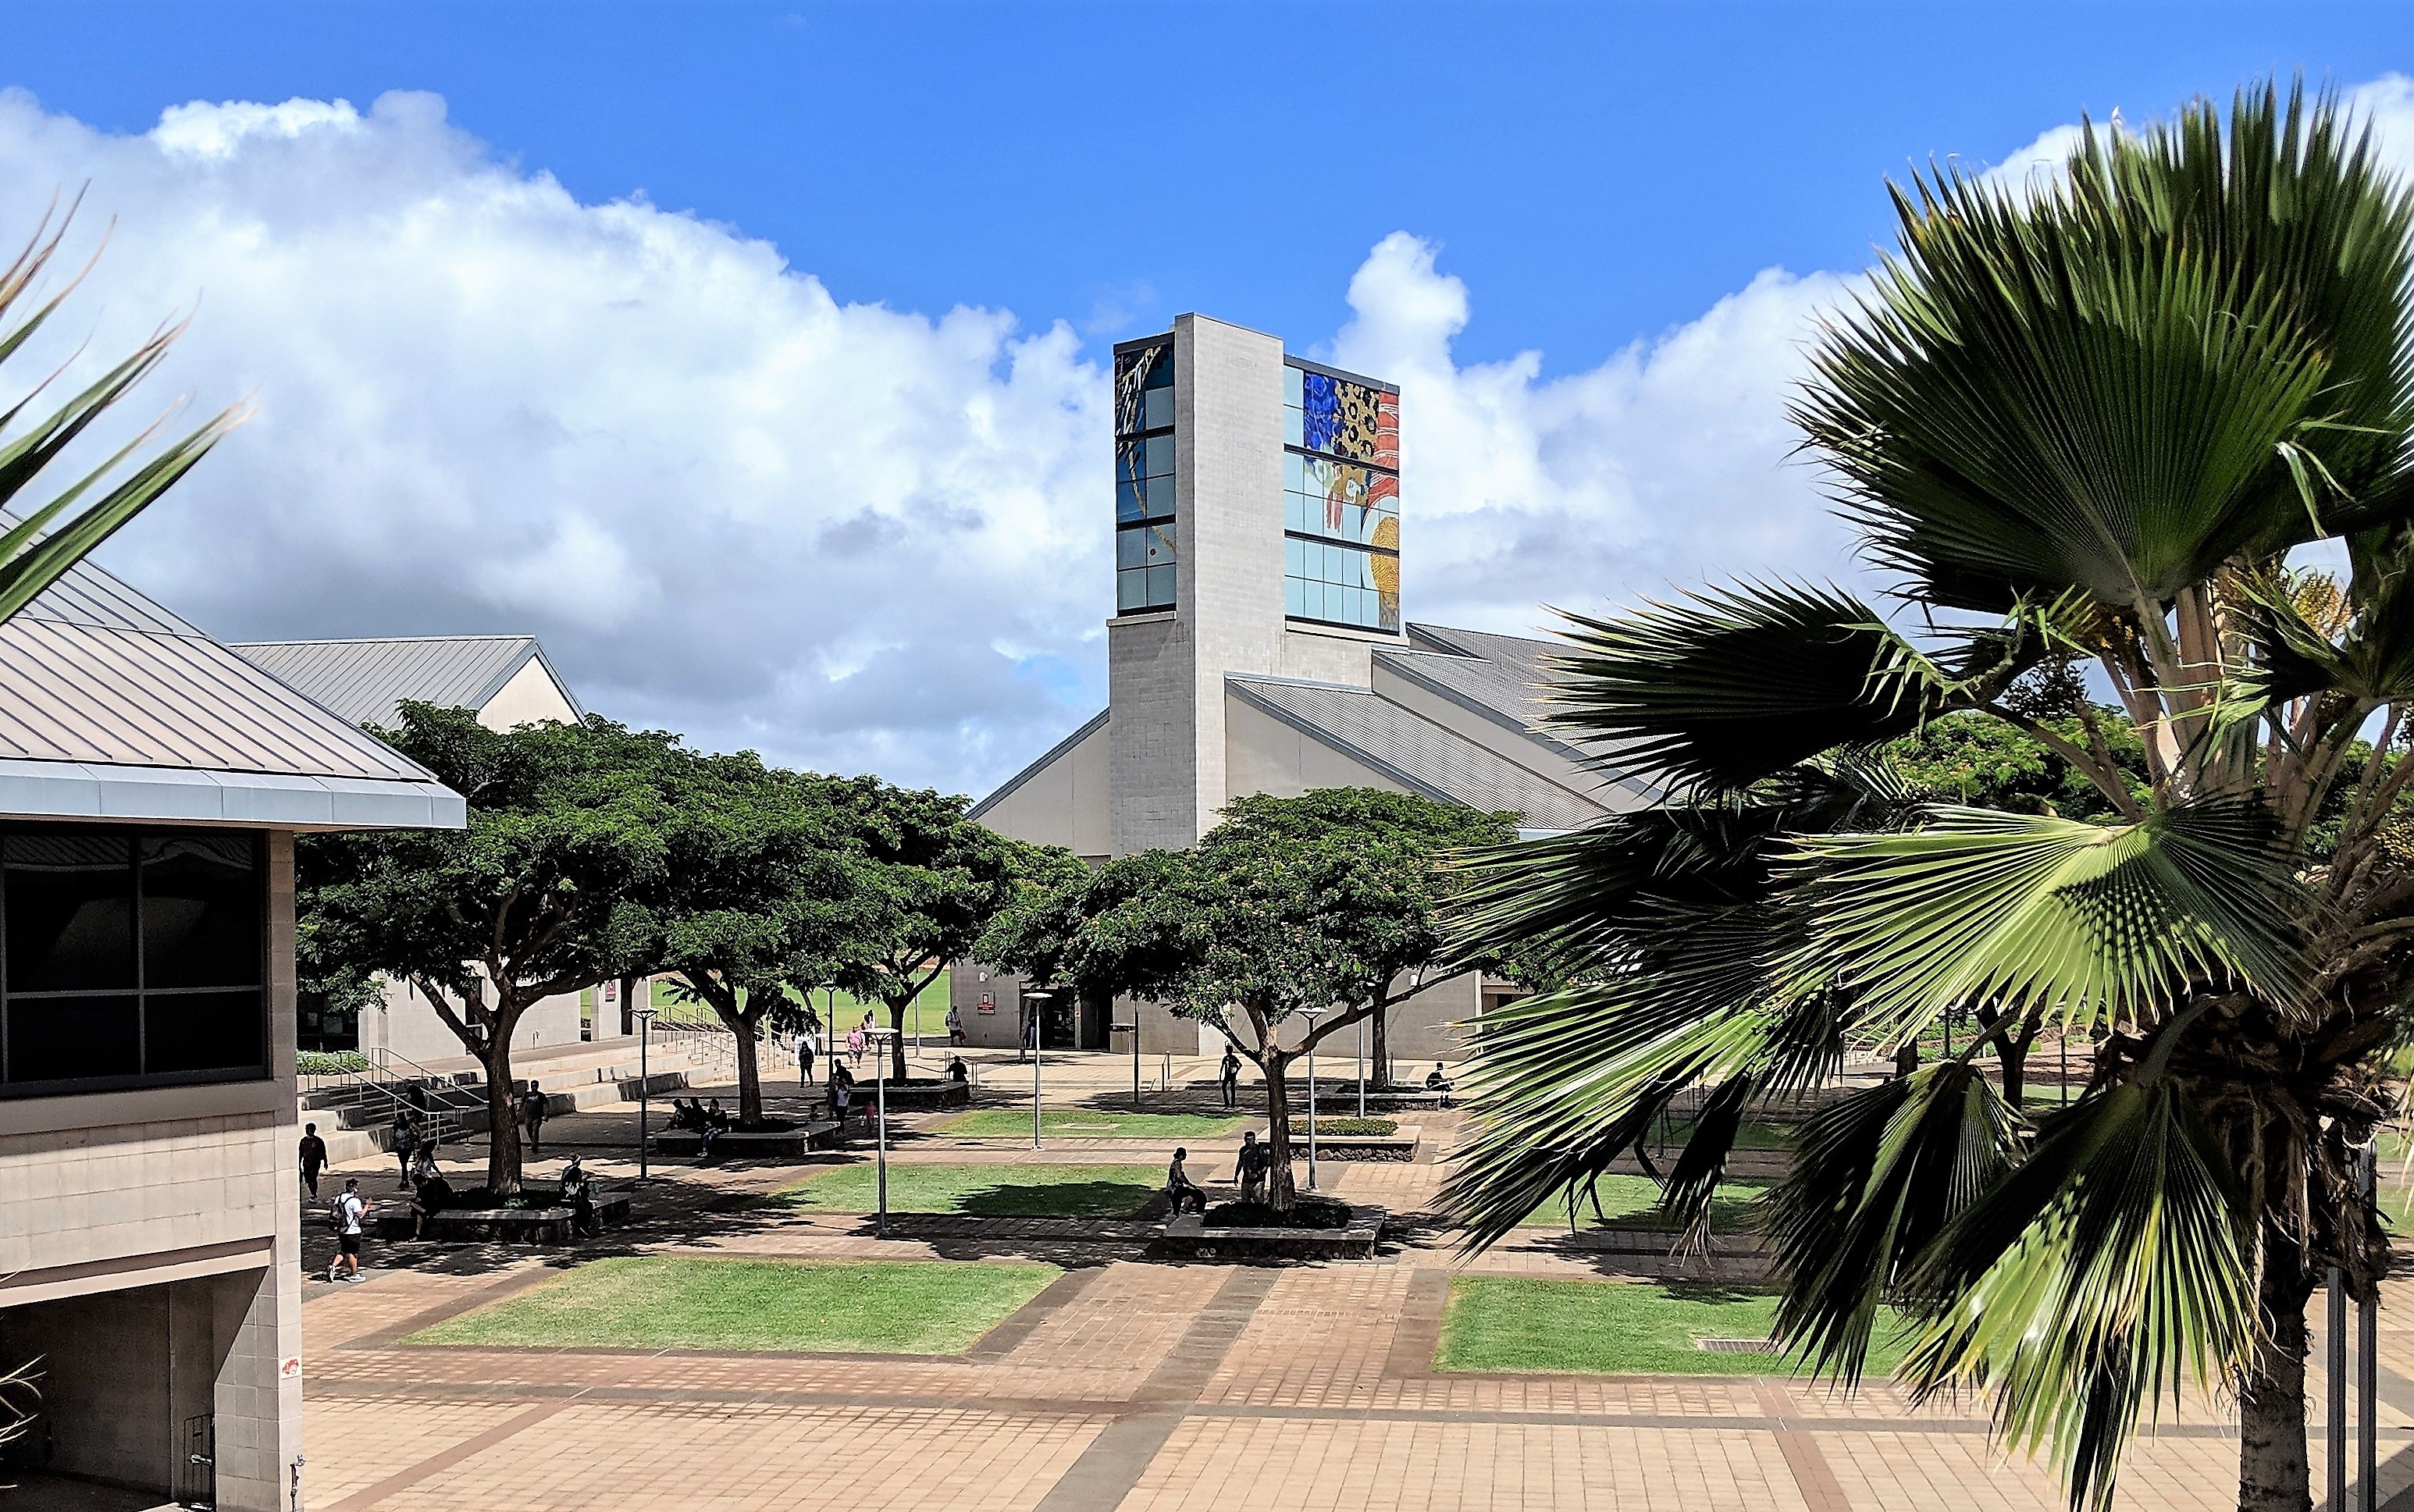 Photo of the UH West Oahu courtyard, which is filled with banyan trees. In the foreground are palm fronds. To the left is the campus' D building and in the background is the library building. Students are walking toward the D building.